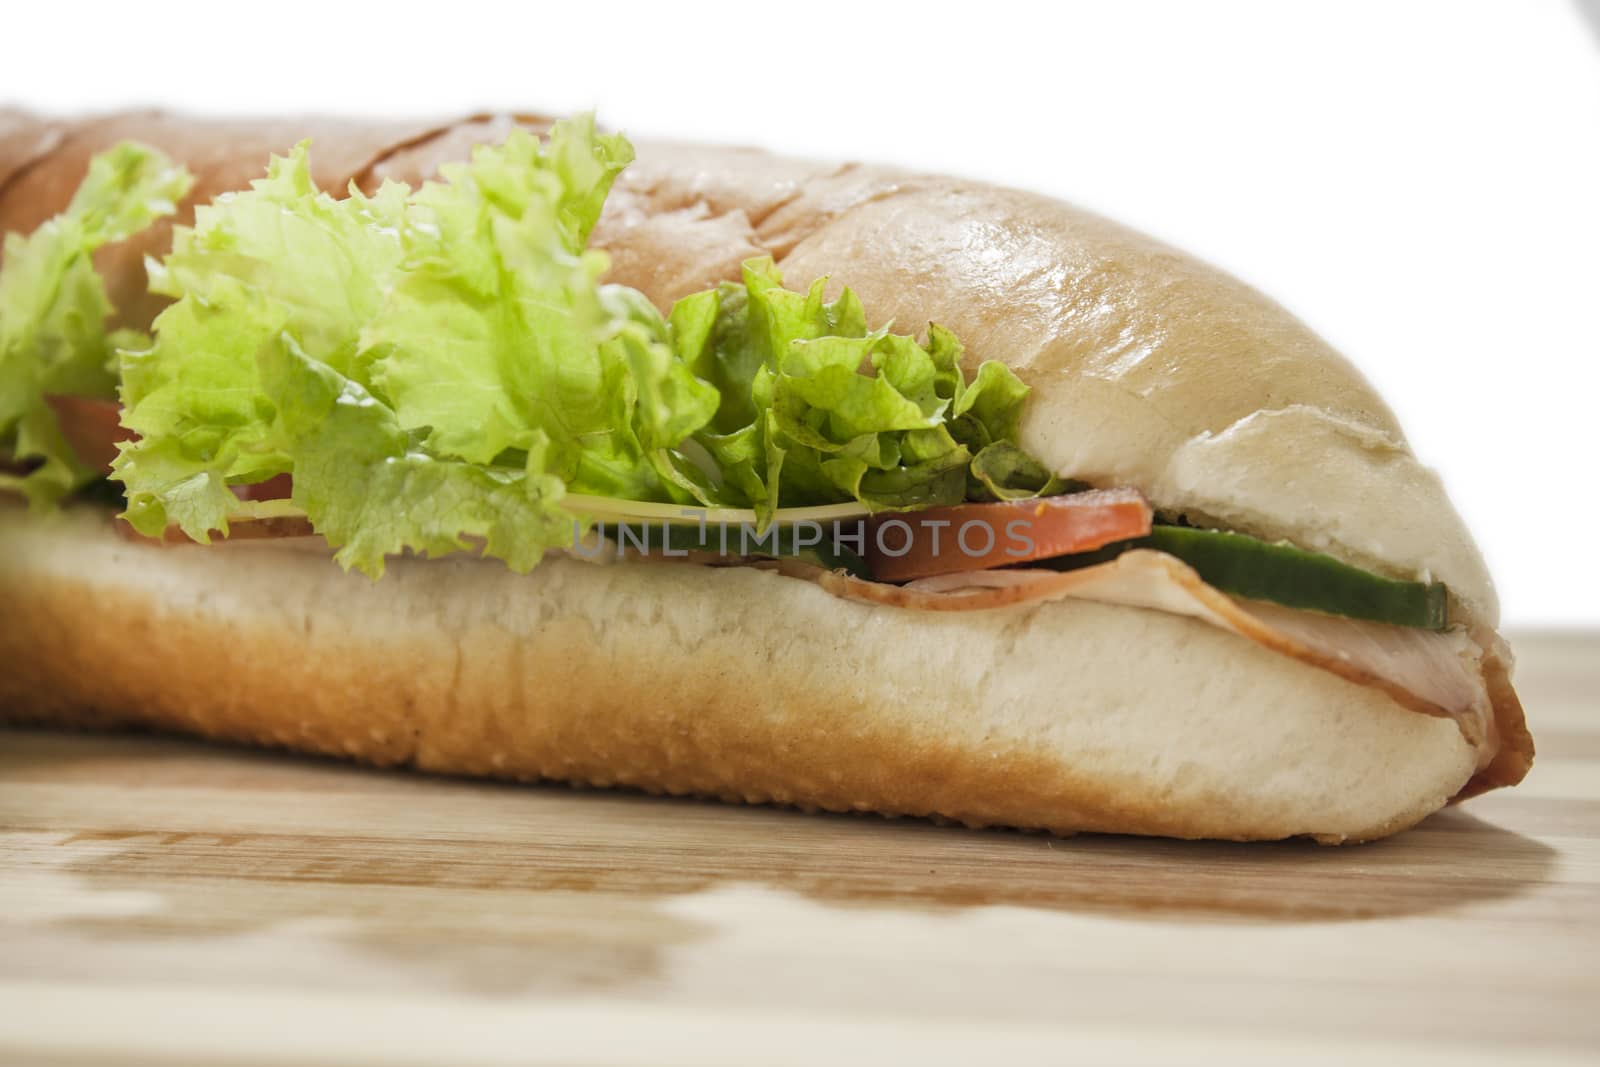 Sandwich in close up view by zlajaphoto